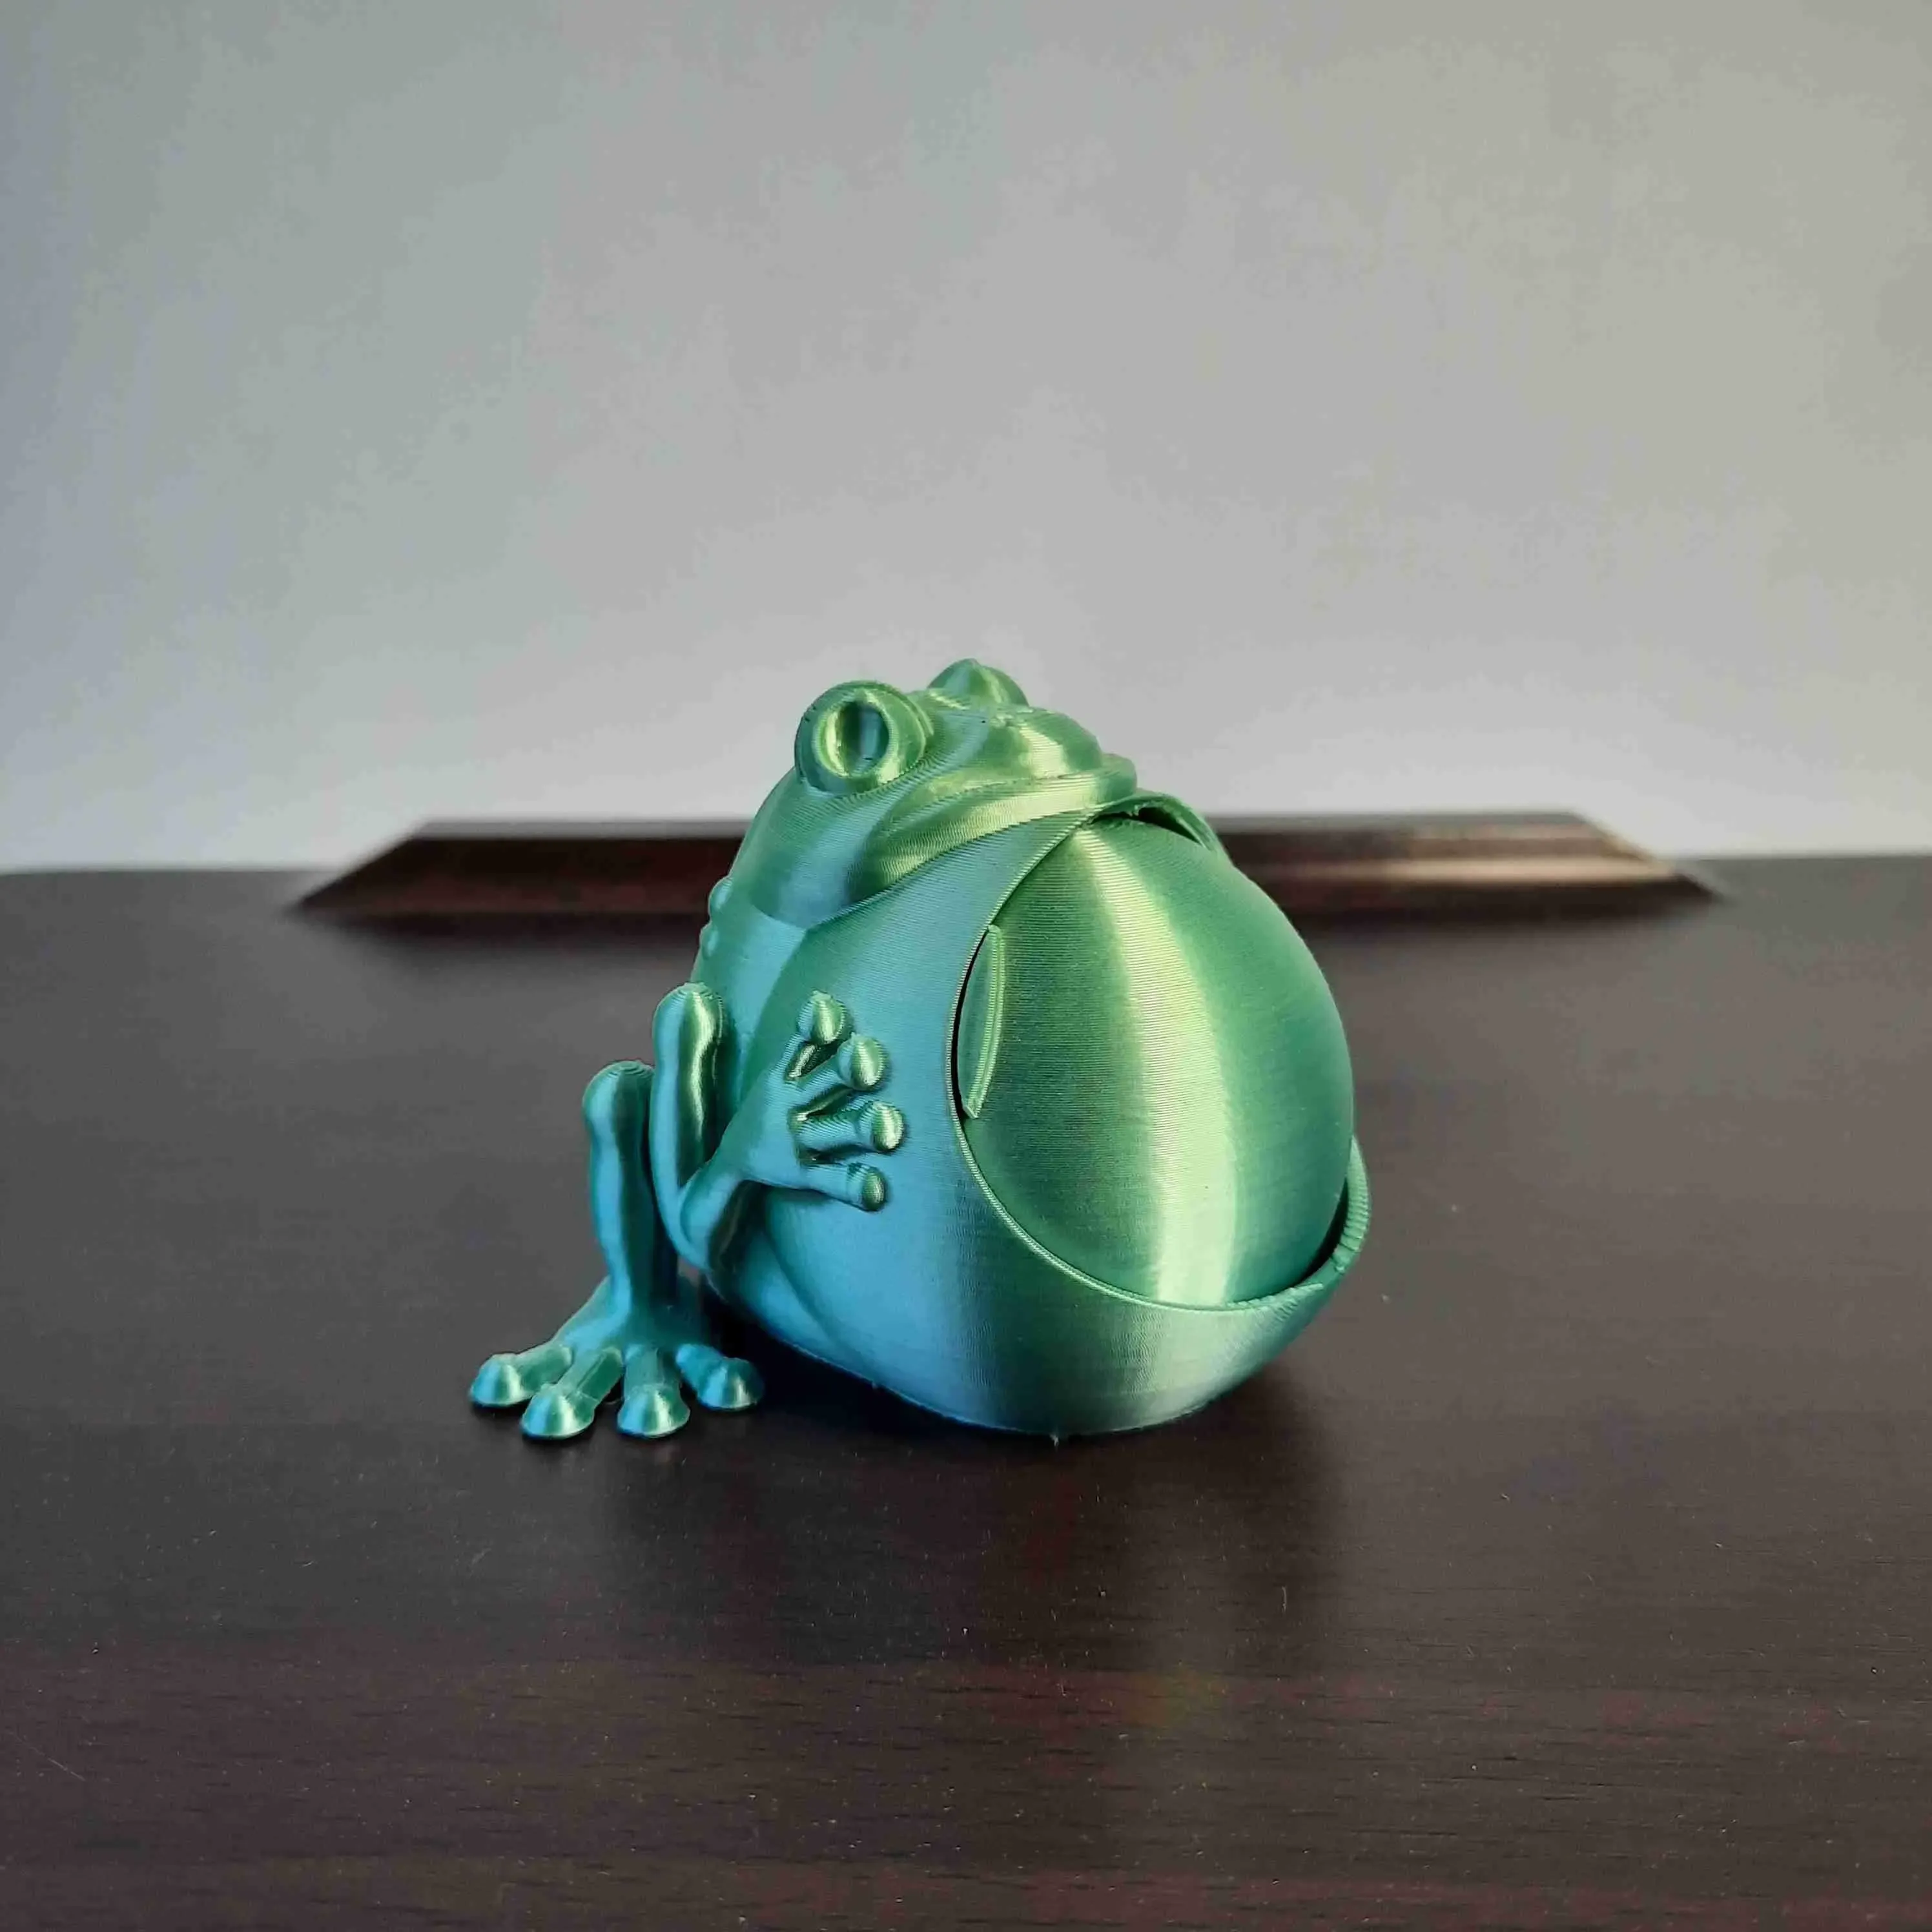 Frog keeps jewelry (not support)